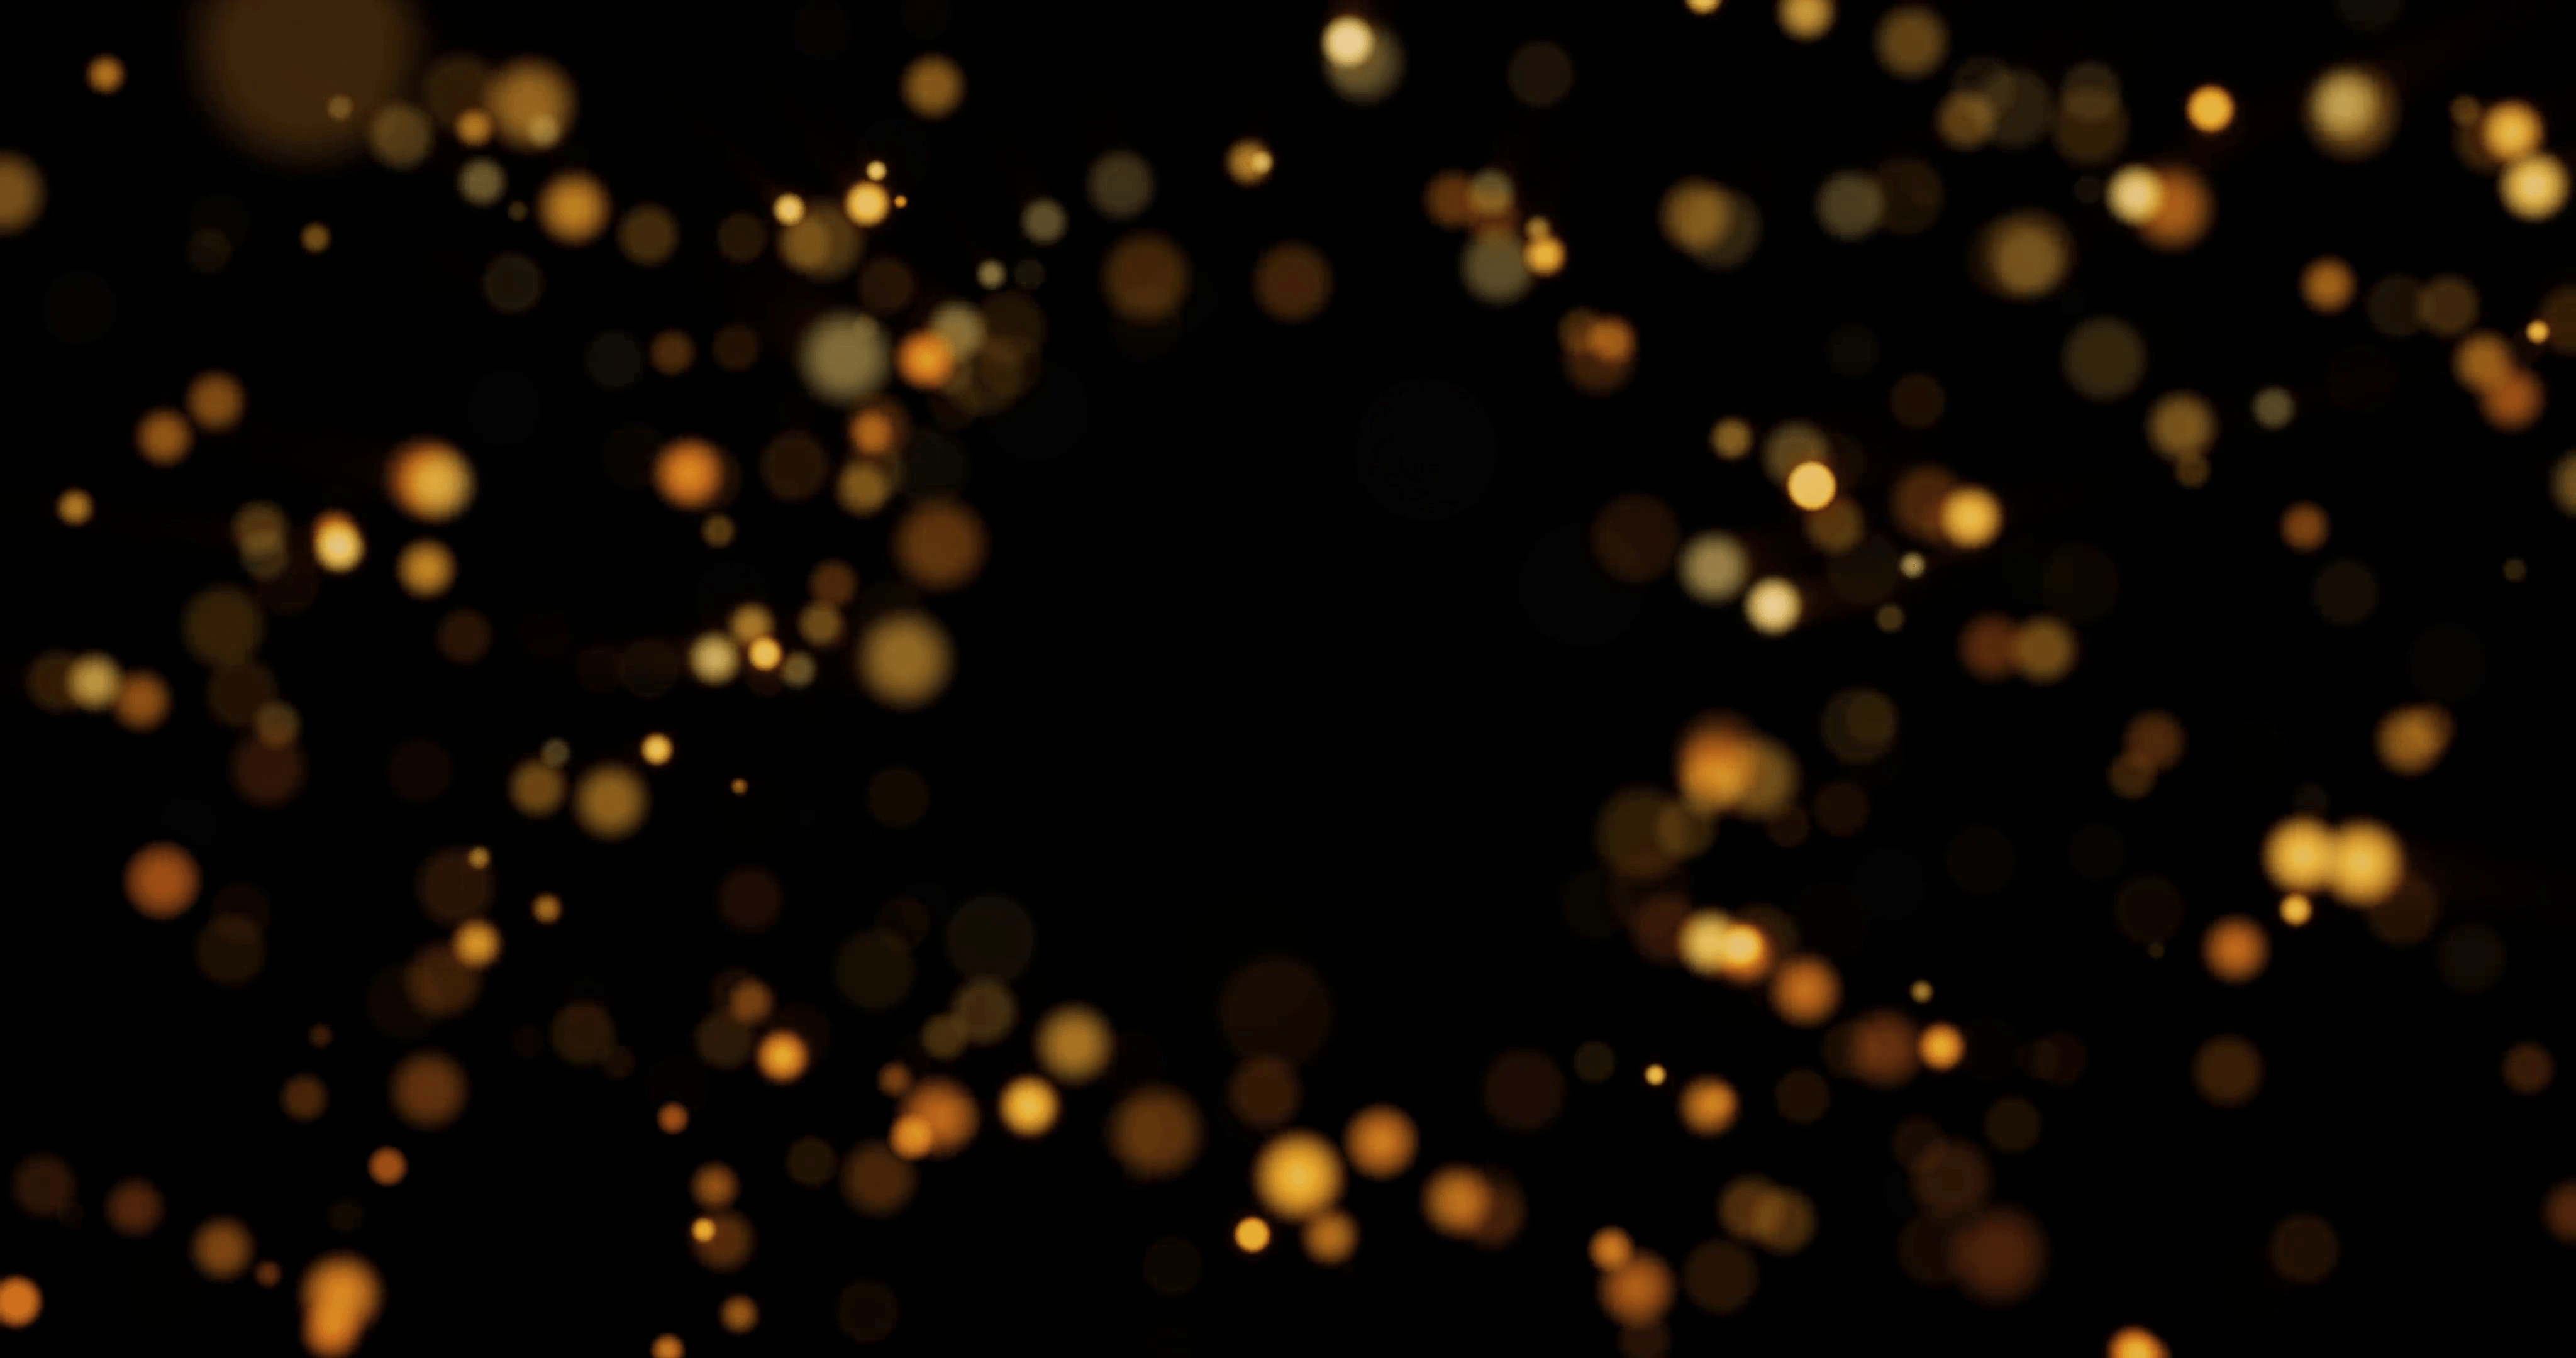 00:01:10 1× Abstract background with shining bokeh sparkles